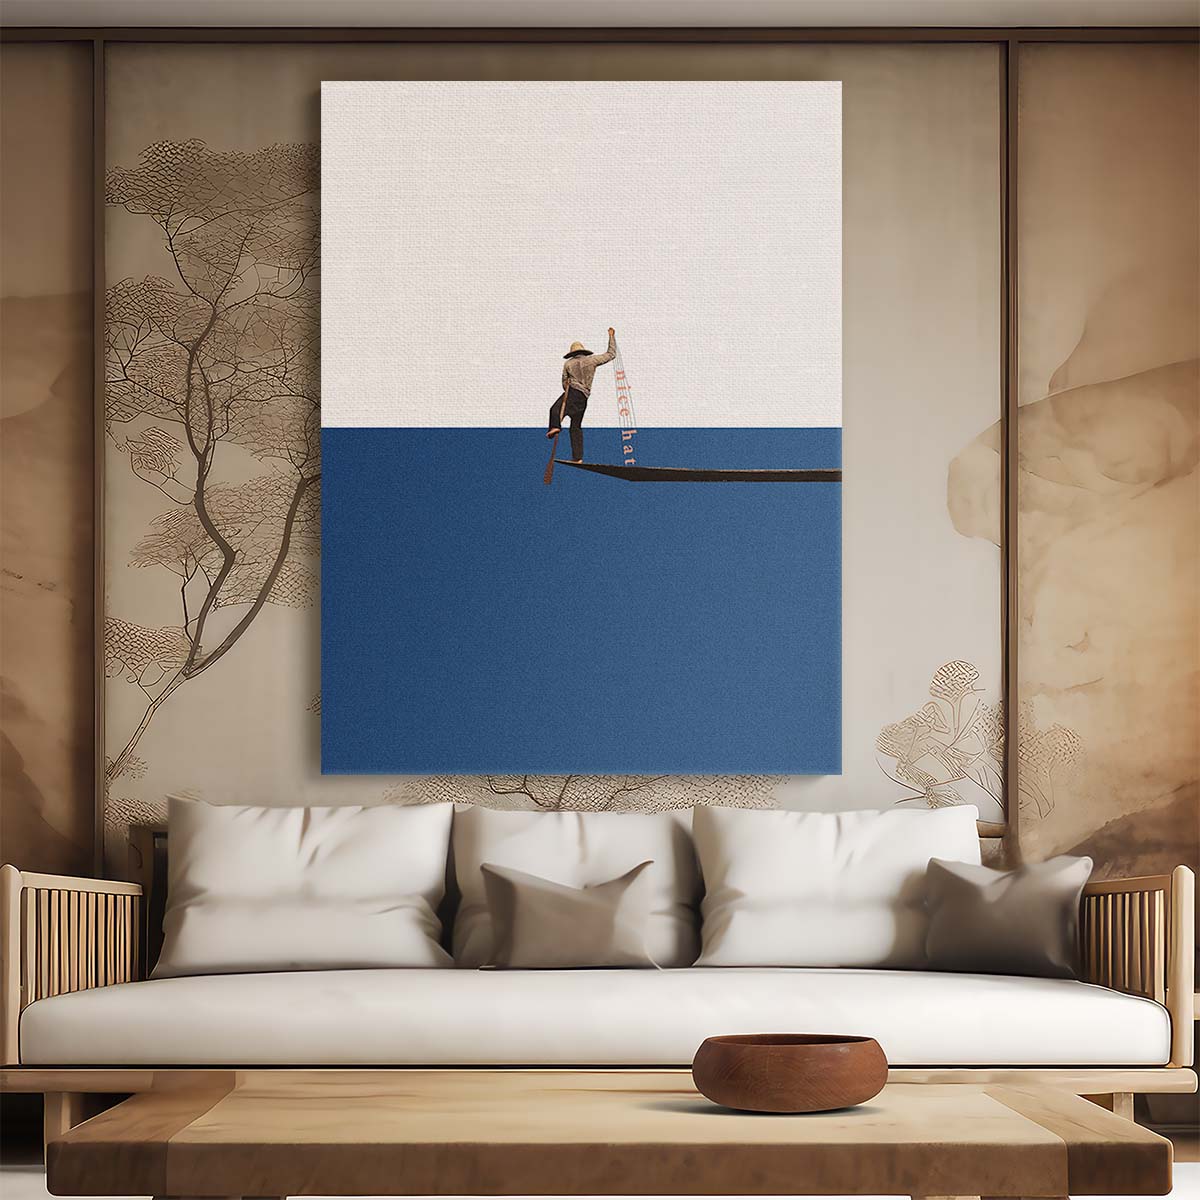 Mid-Century Venice Illustration Wall Art by Maarten Leon by Luxuriance Designs, made in USA